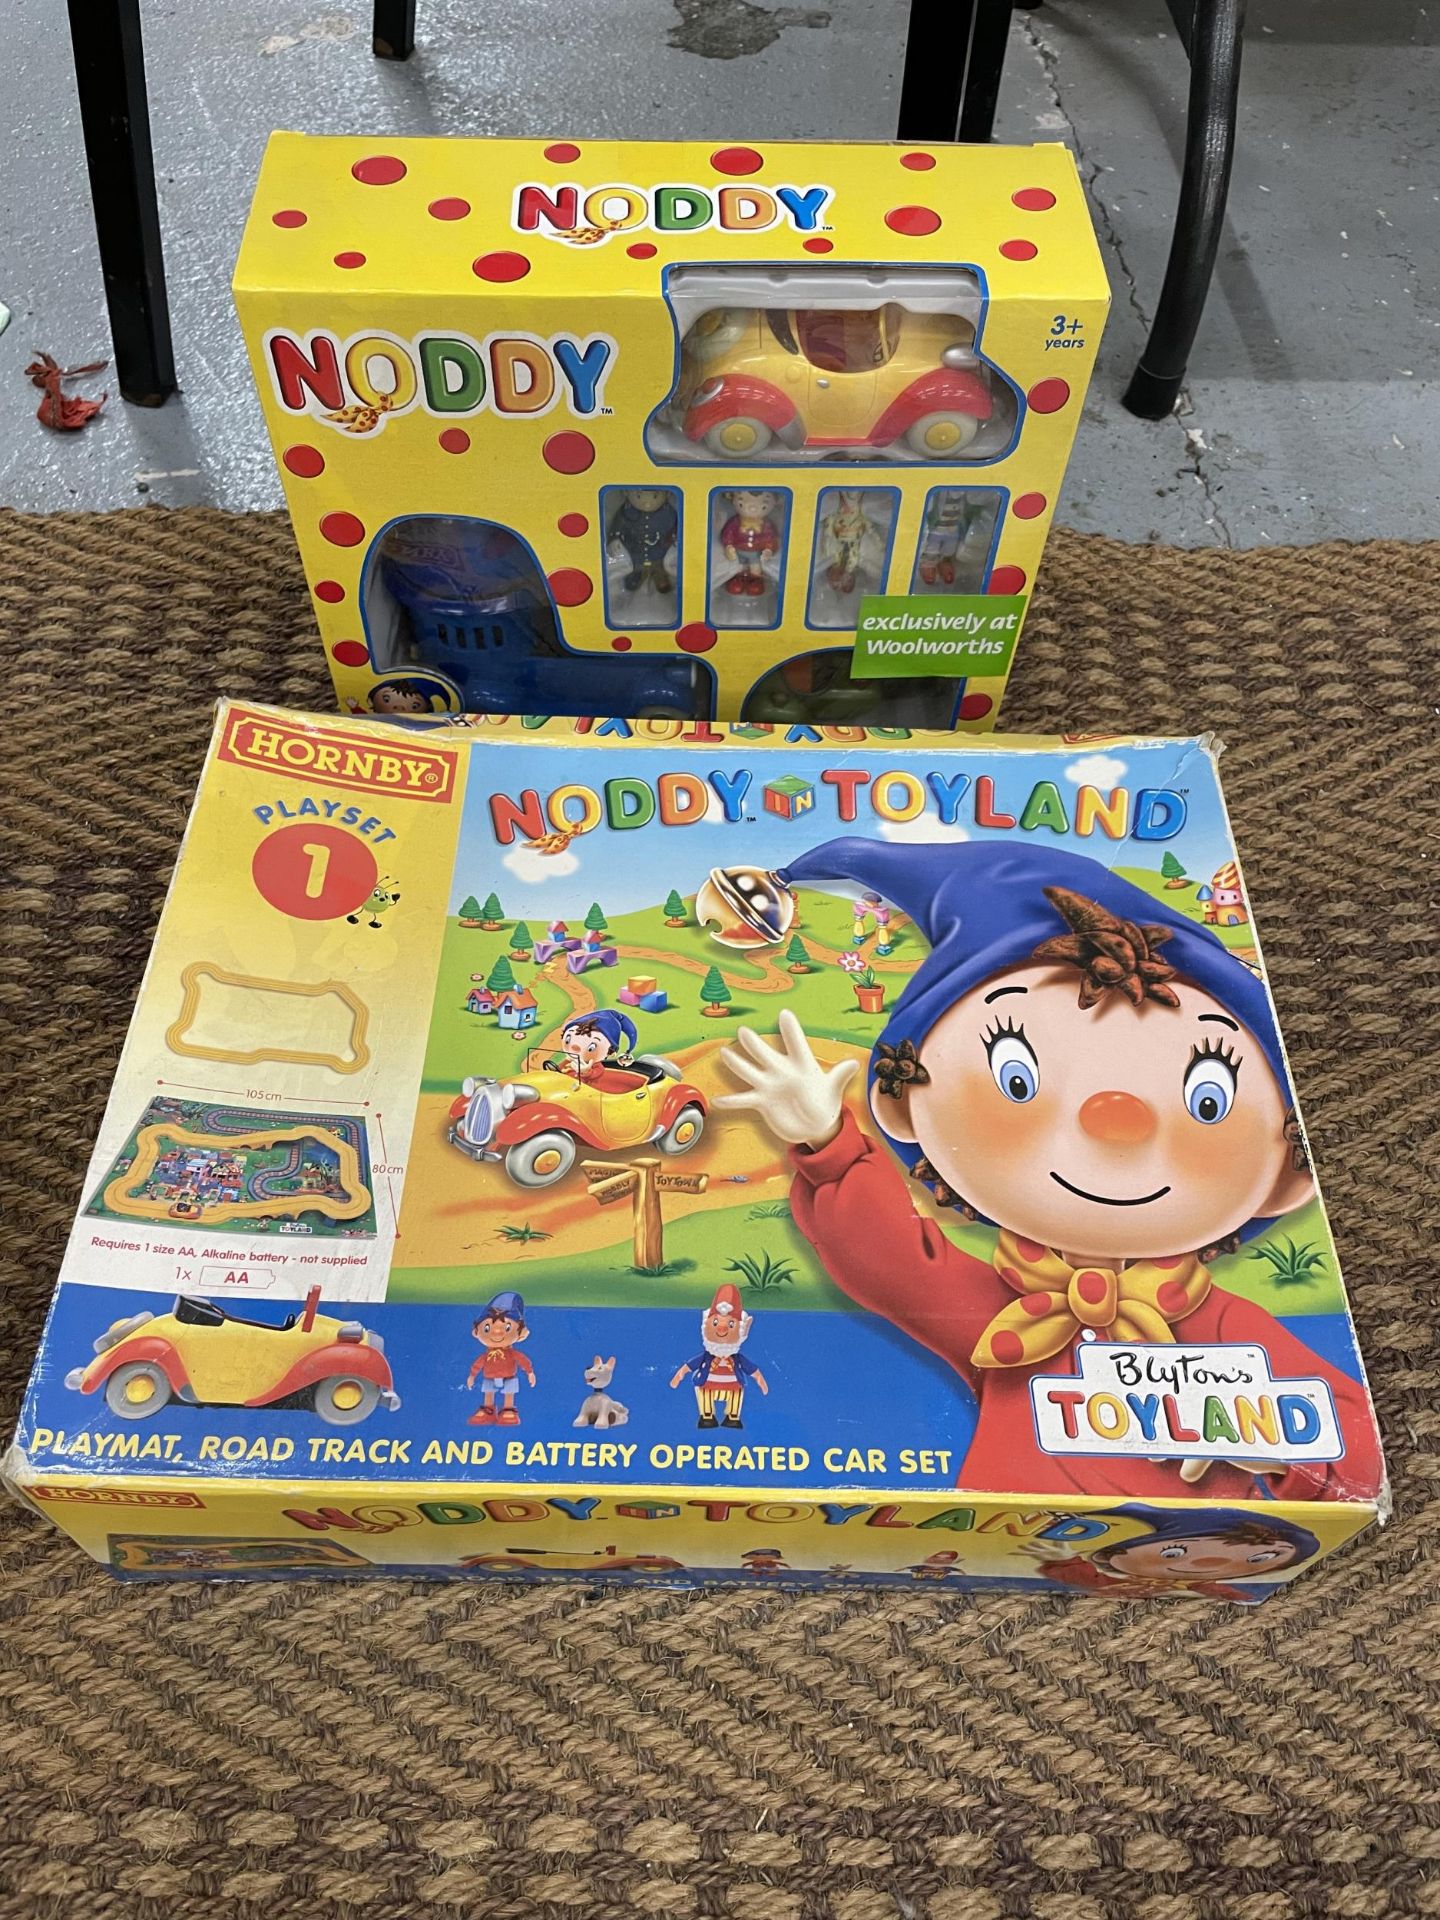 TWO BOXED NODDY ITEMS TO INCLUDE TOYLAND PLAYSET AND A VEHICLE SET WITH FIGURINES